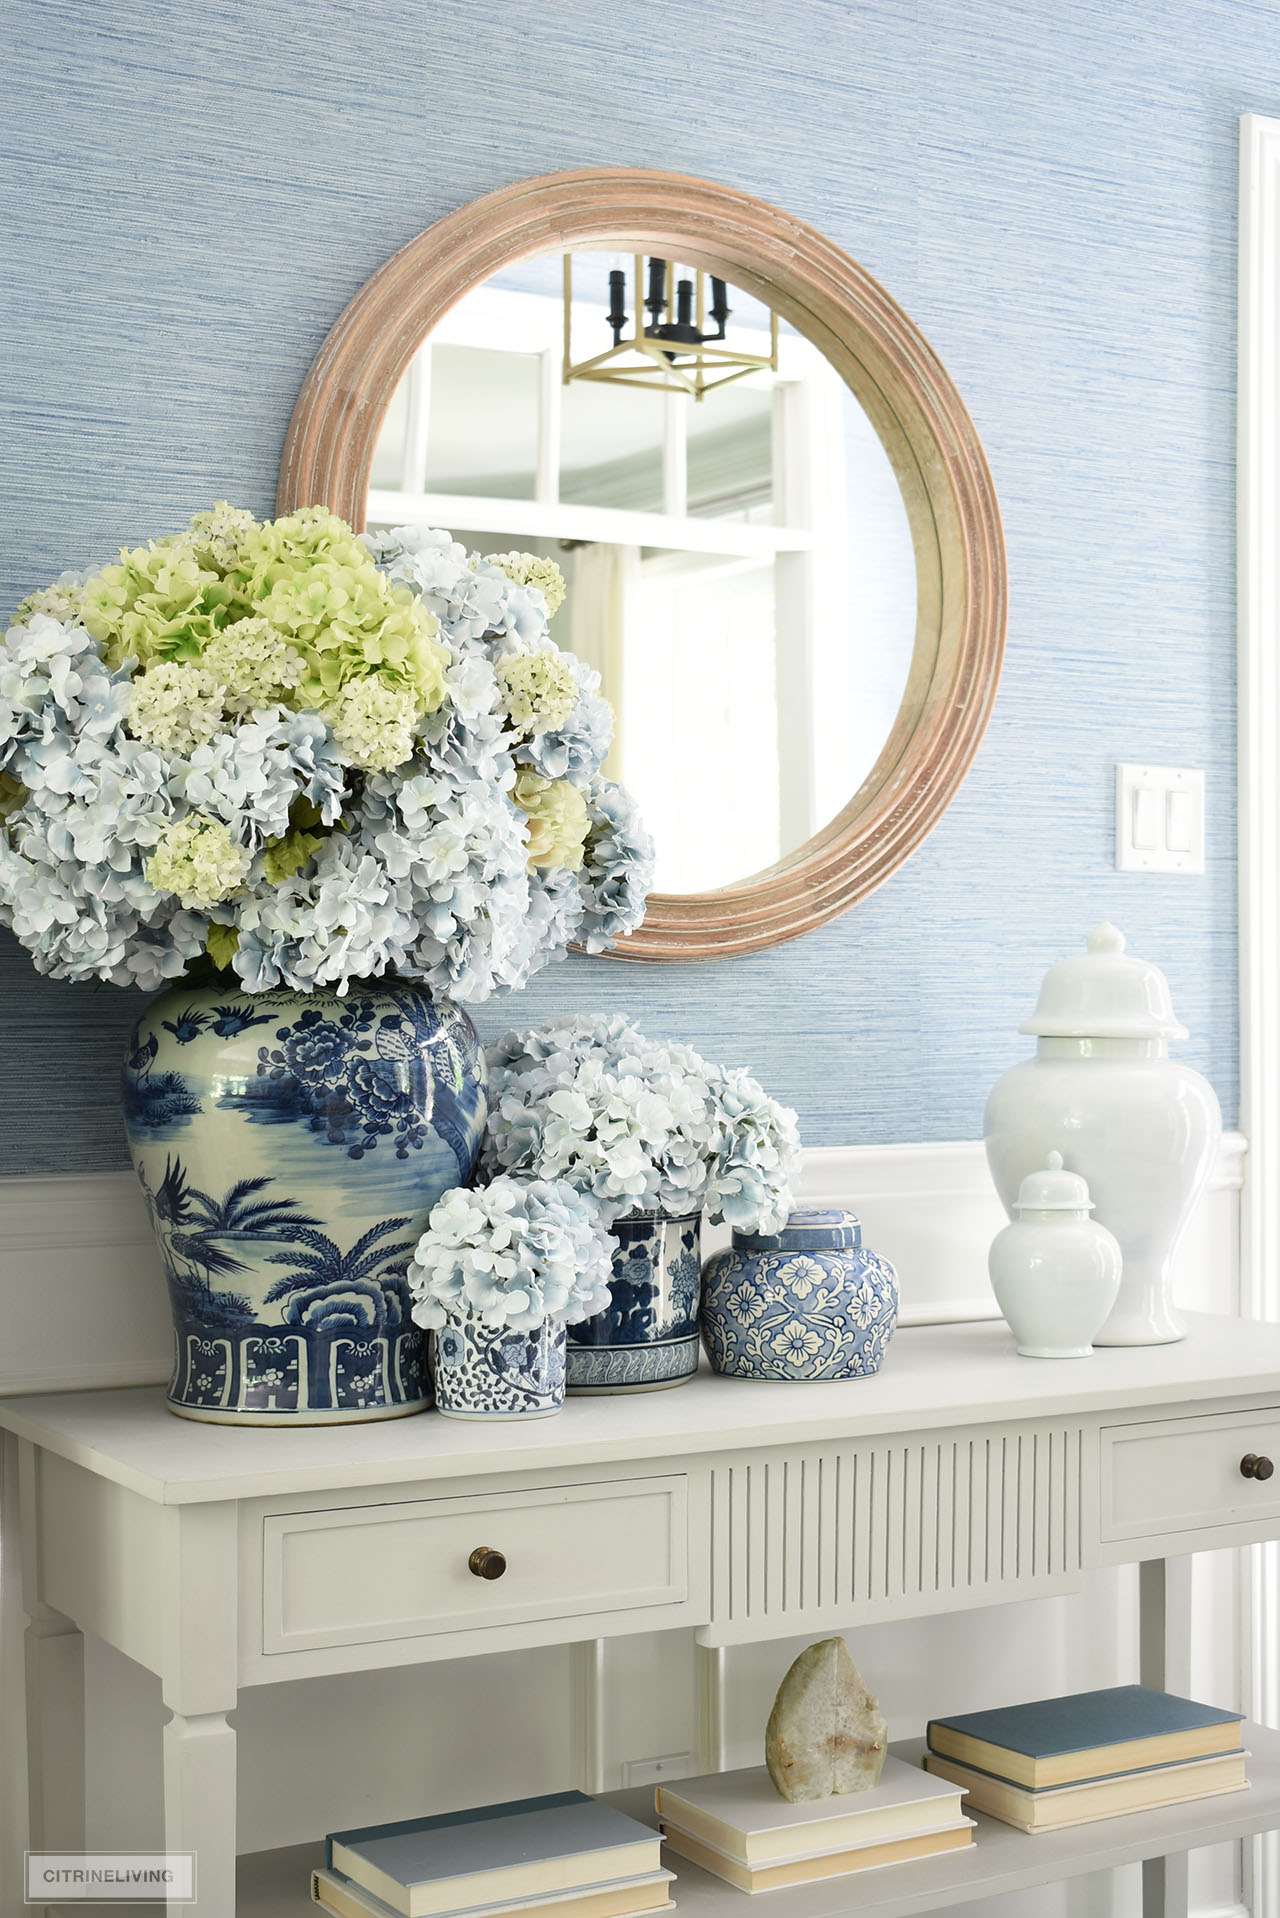 Blue and white ginger jars, containers and vases styled in a beautiful grouping in this summer entryway makes a chic statement arranged with beautiful blue and green hydrangeas.